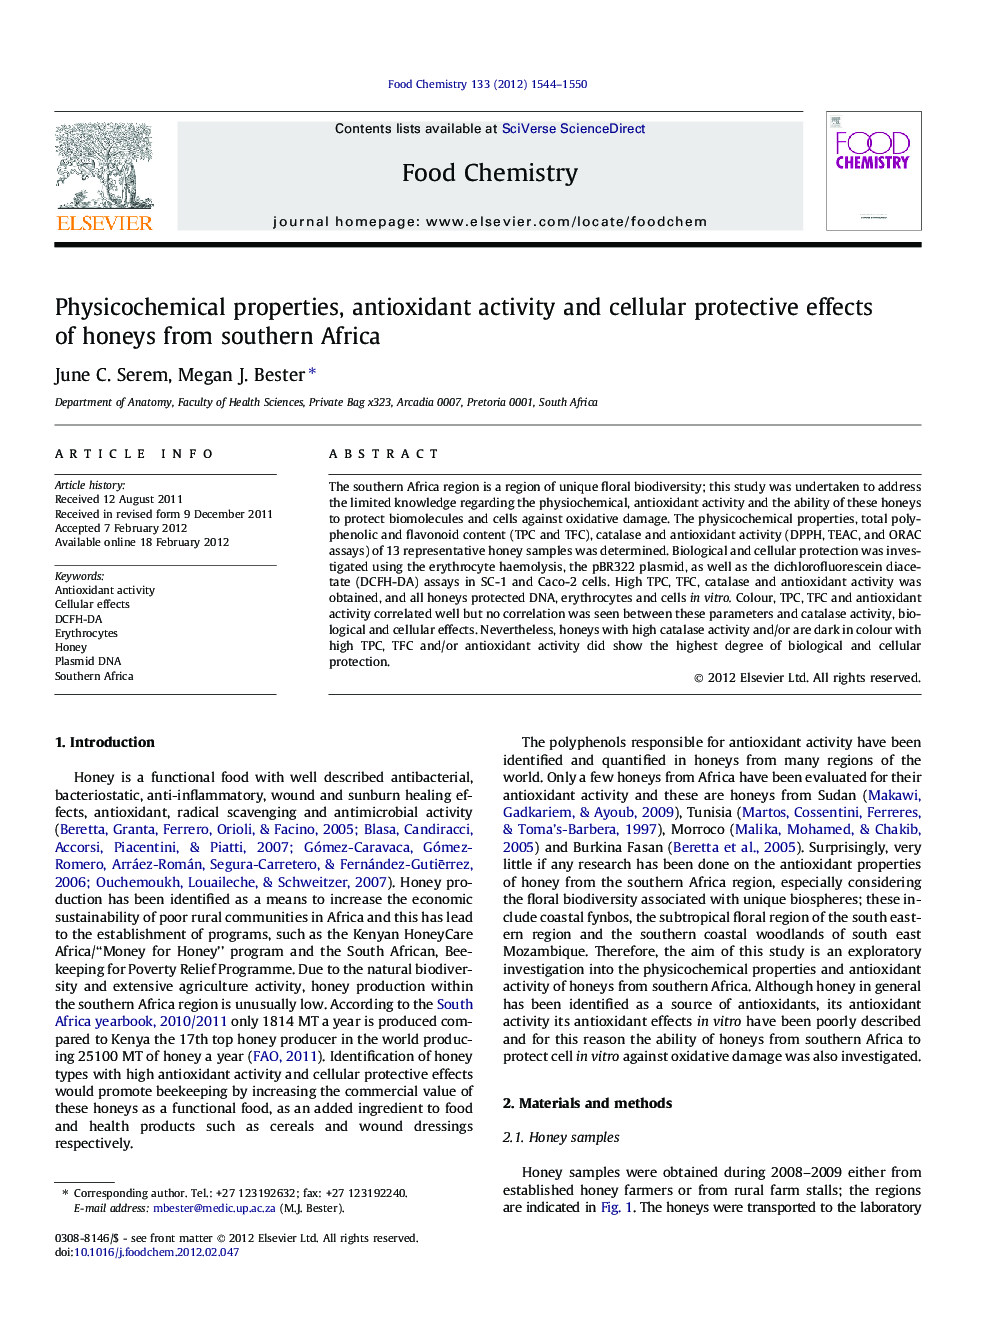 Physicochemical properties, antioxidant activity and cellular protective effects of honeys from southern Africa